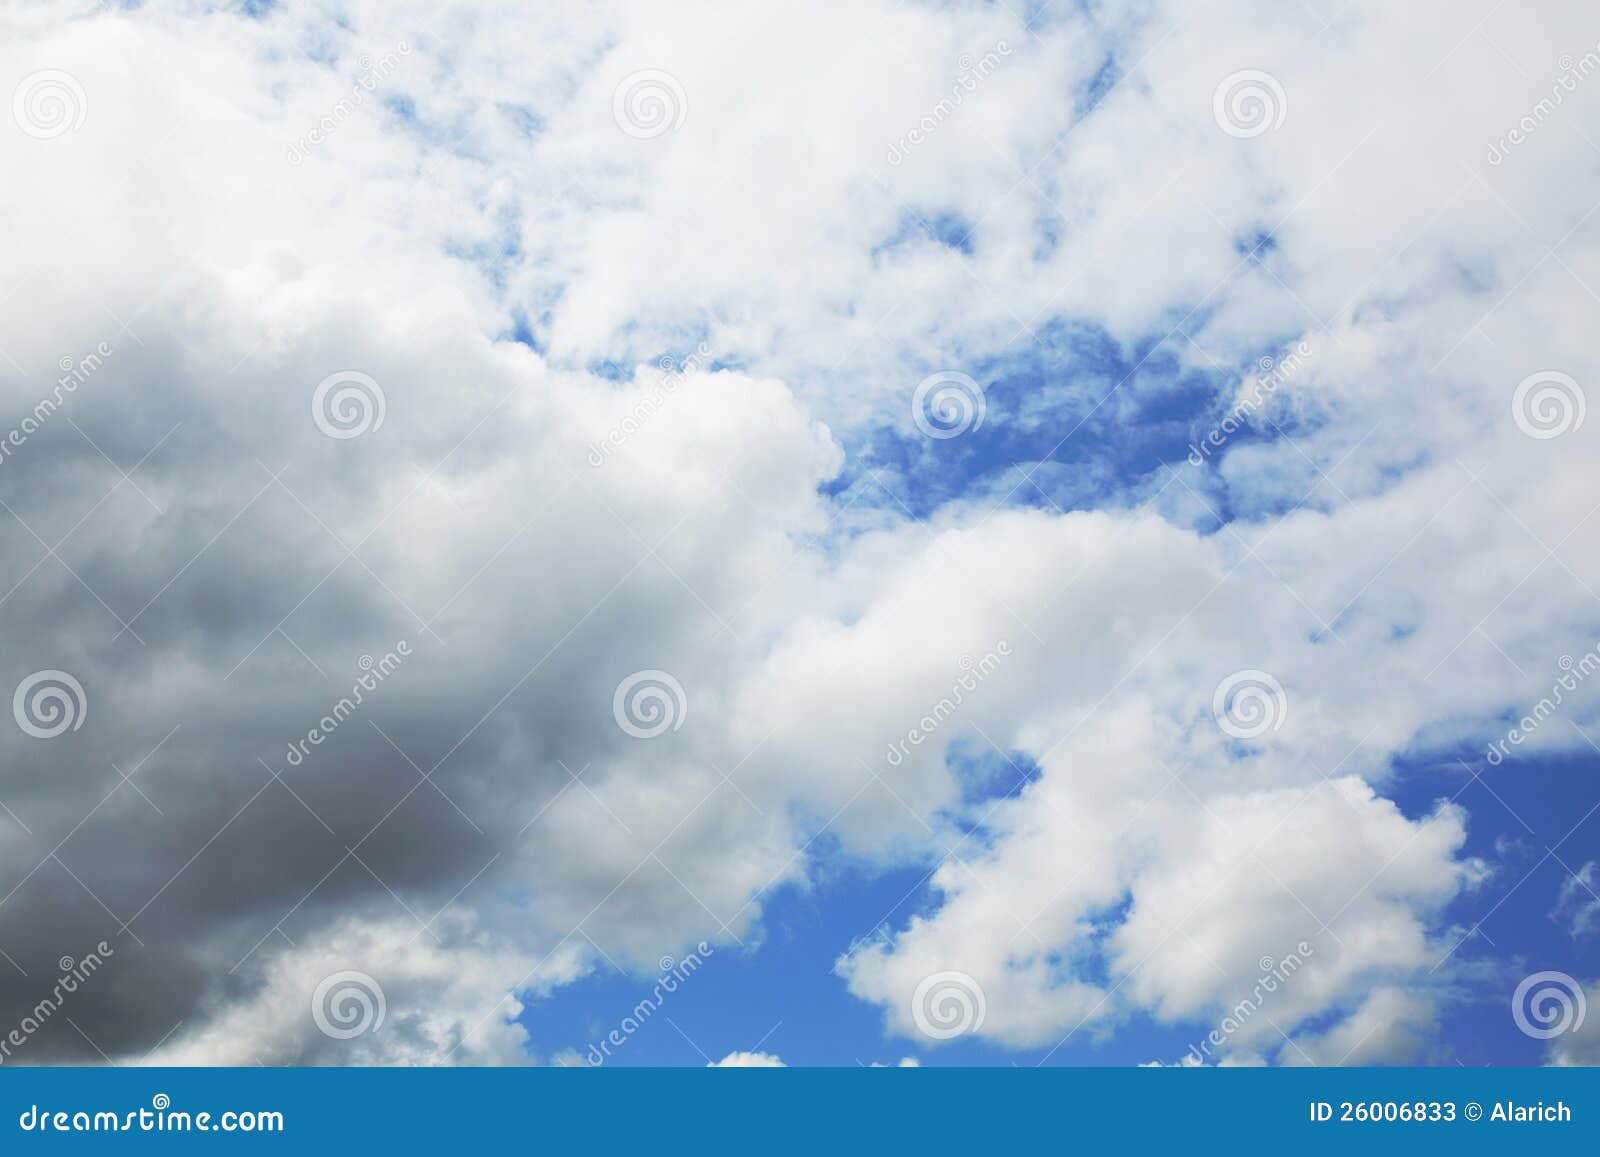 stratocumulus clouds and the blue sky